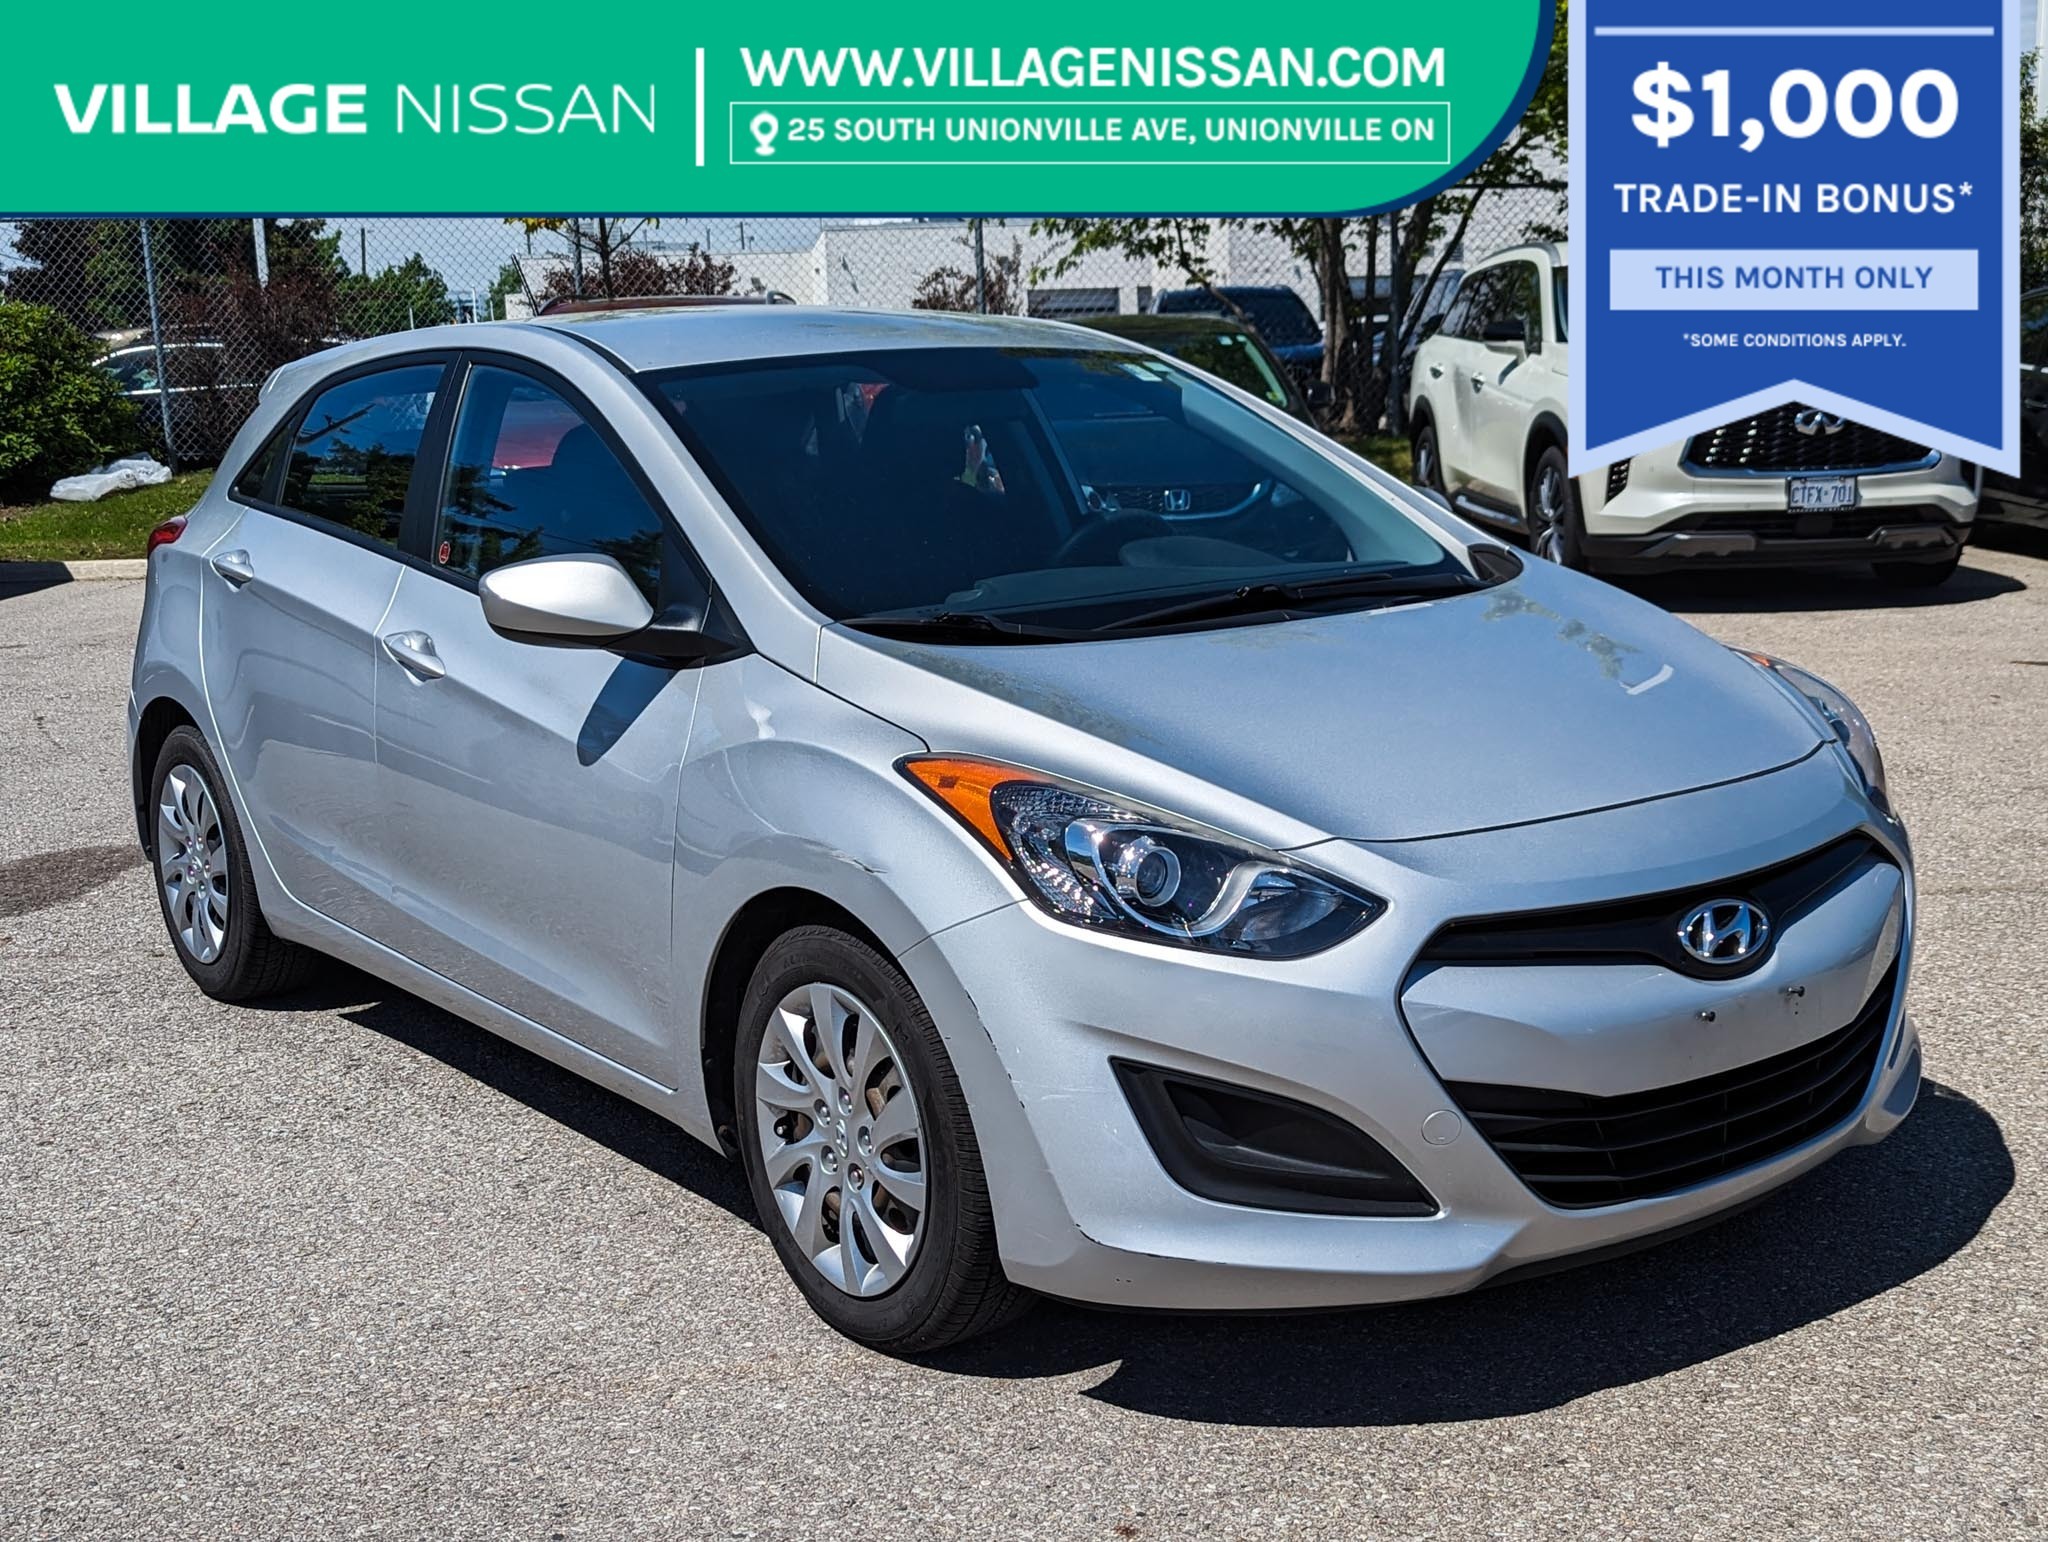 2014 Hyundai Elantra GT ONE OWNER | CLEAN HISTORY | AMAZING CONDITION